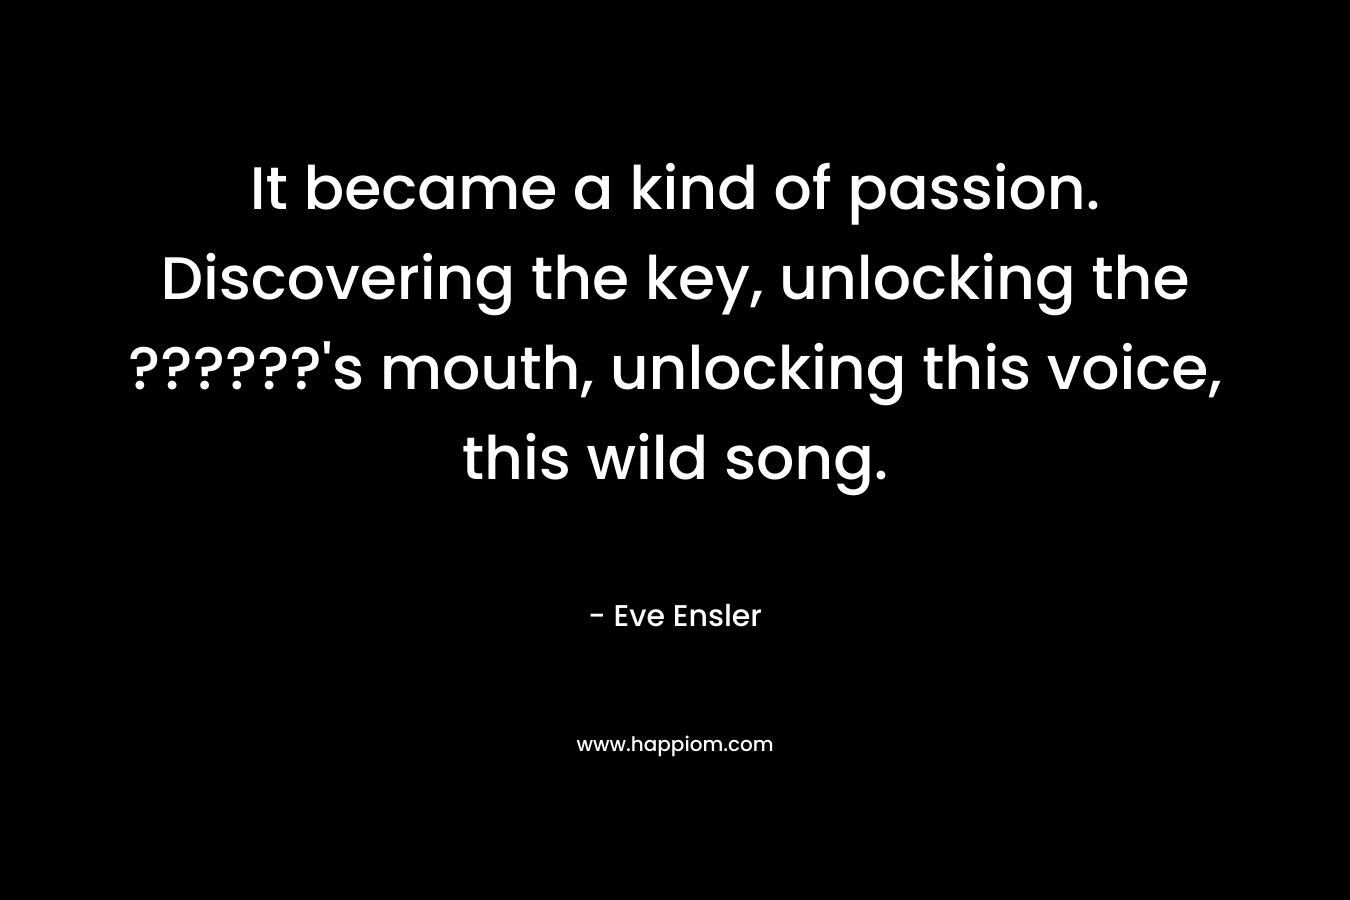 It became a kind of passion. Discovering the key, unlocking the ??????'s mouth, unlocking this voice, this wild song.